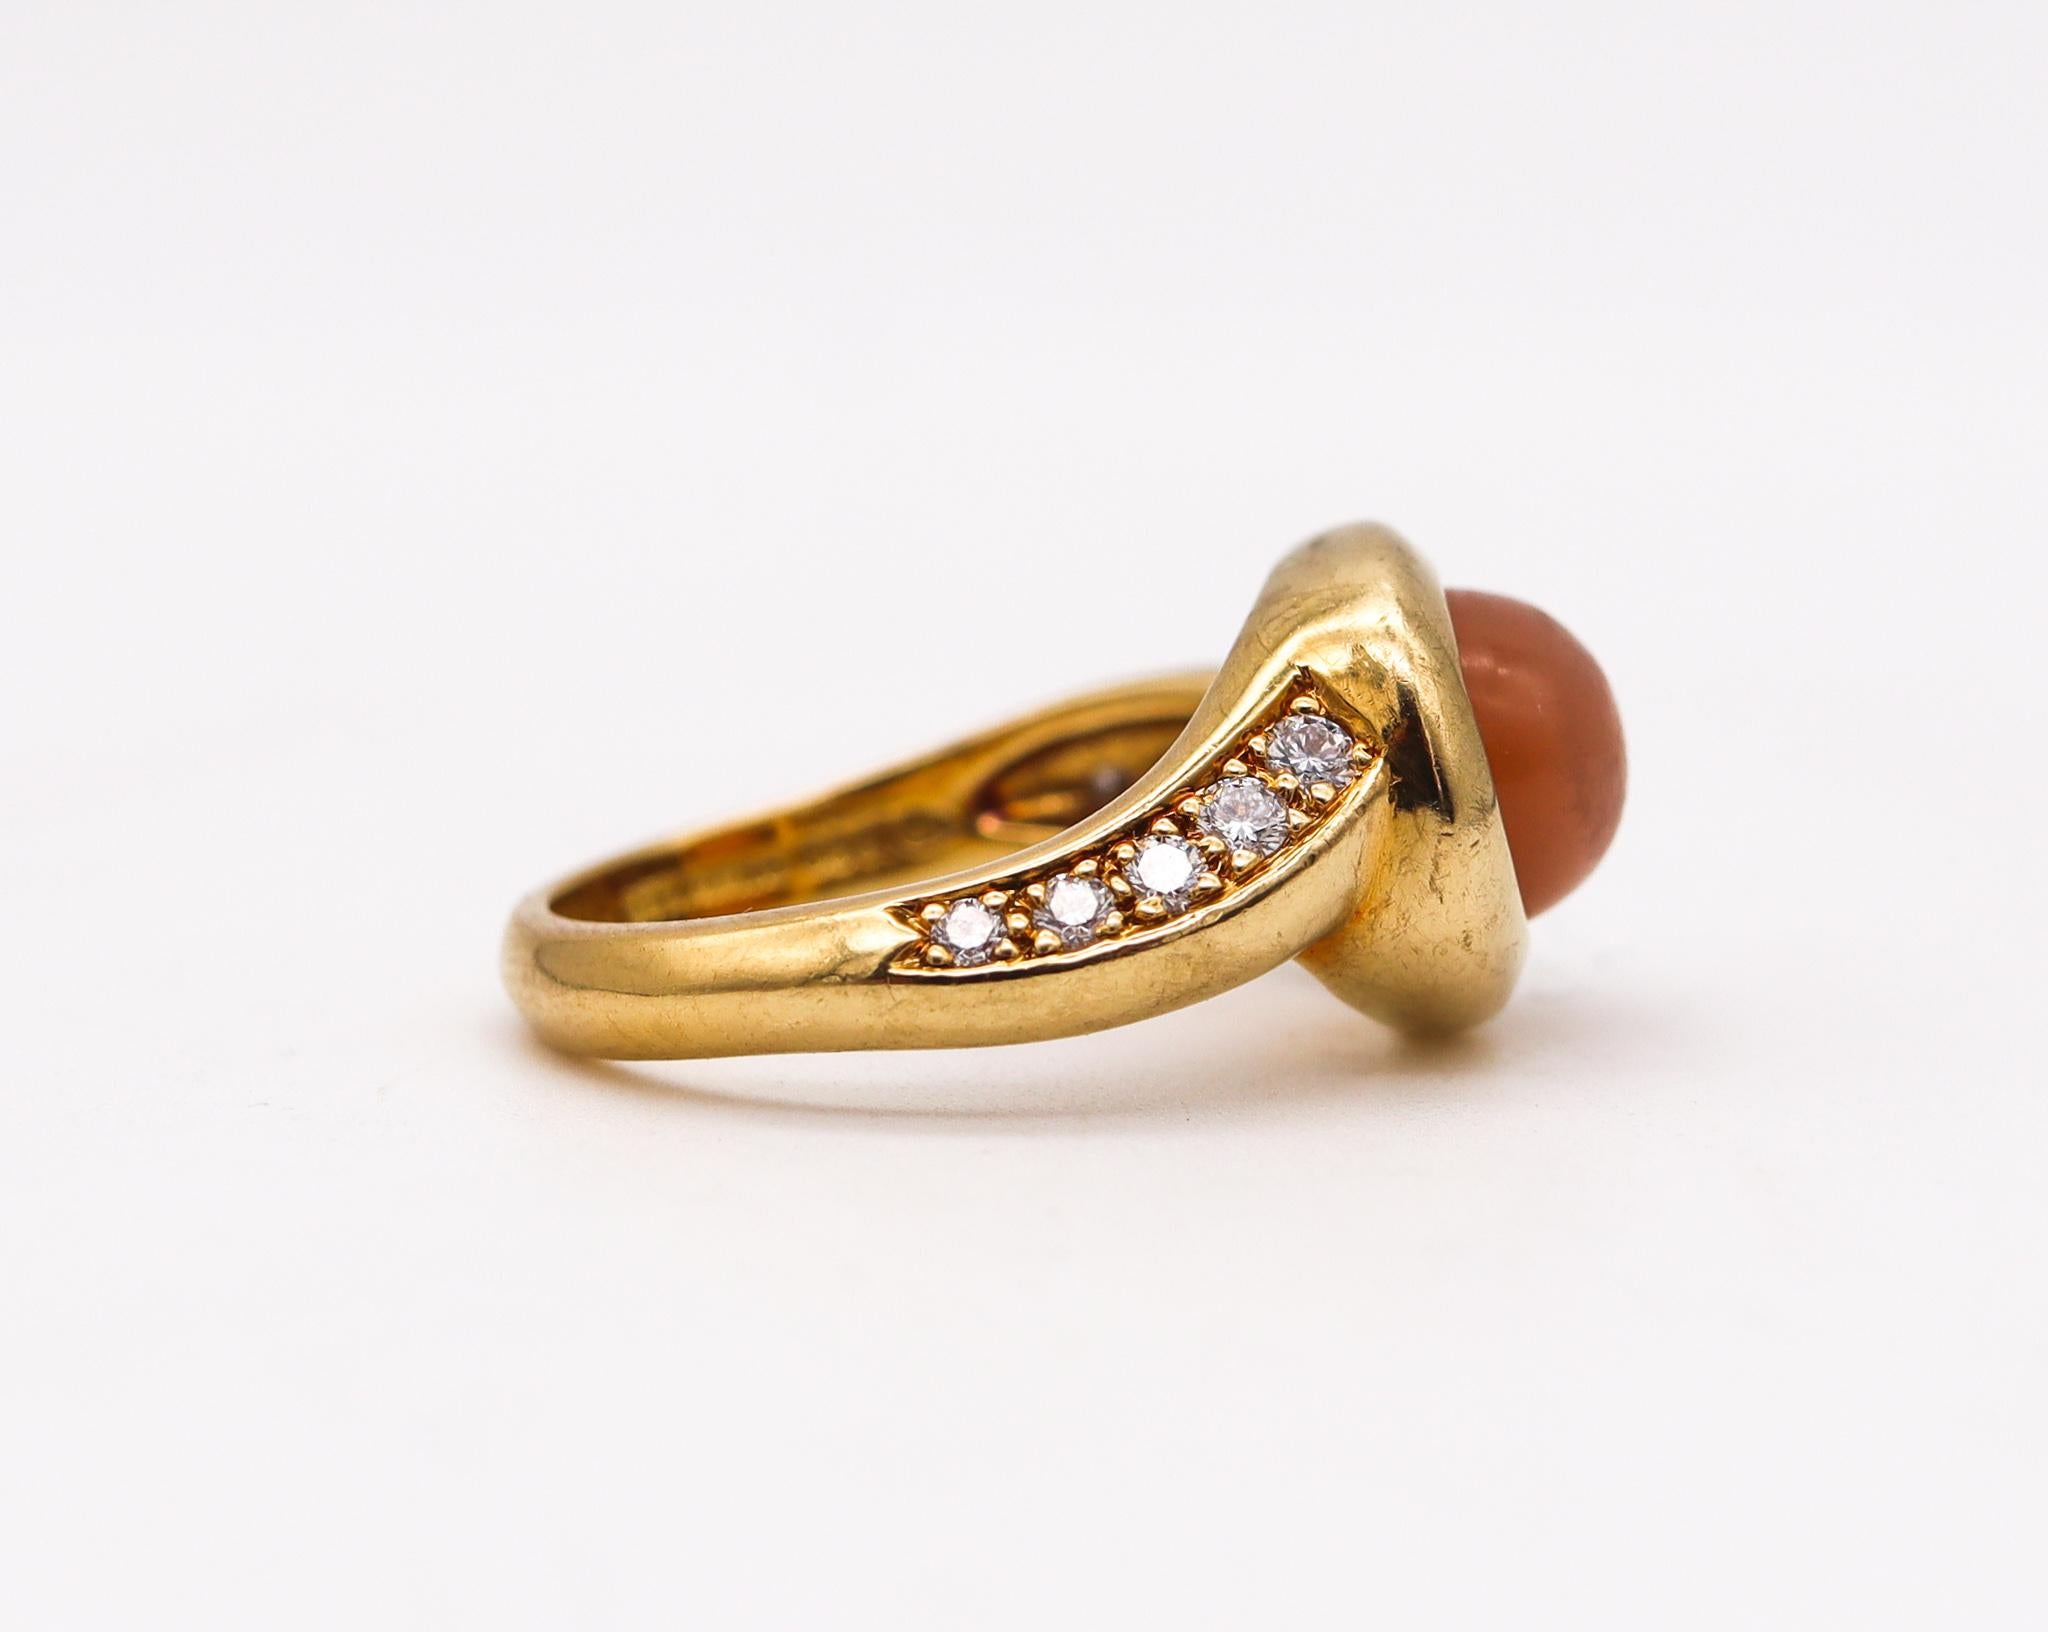 Modernist Angela Cummings Ring In 18Kt Gold With 4.98 Ctw In Diamonds And Moonstone For Sale